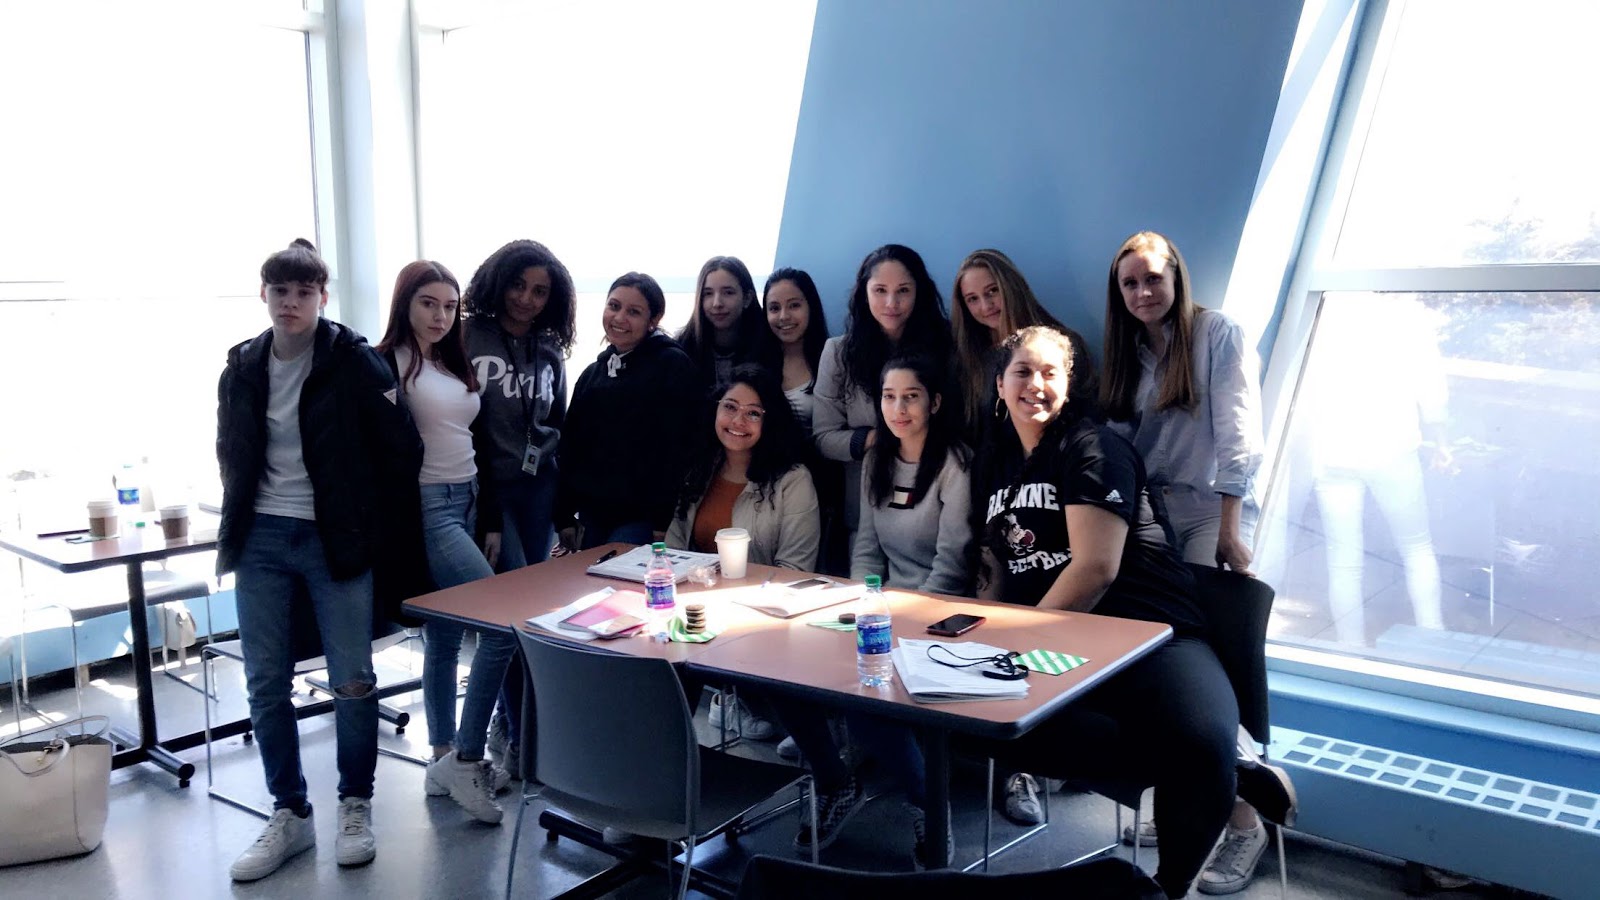 (from left to right) Tiffany Fales, Tiara Fales, Elaine Tiruneh, Catherine Peralta, Sabrina Cetinich, Leslie Castro, Janet Shenouda, Sara Leong, Reem Abughannam, Olivia Cahn, Aya Abdalla, and Josephine Conlon attended the Symposium at Liberty Science Center